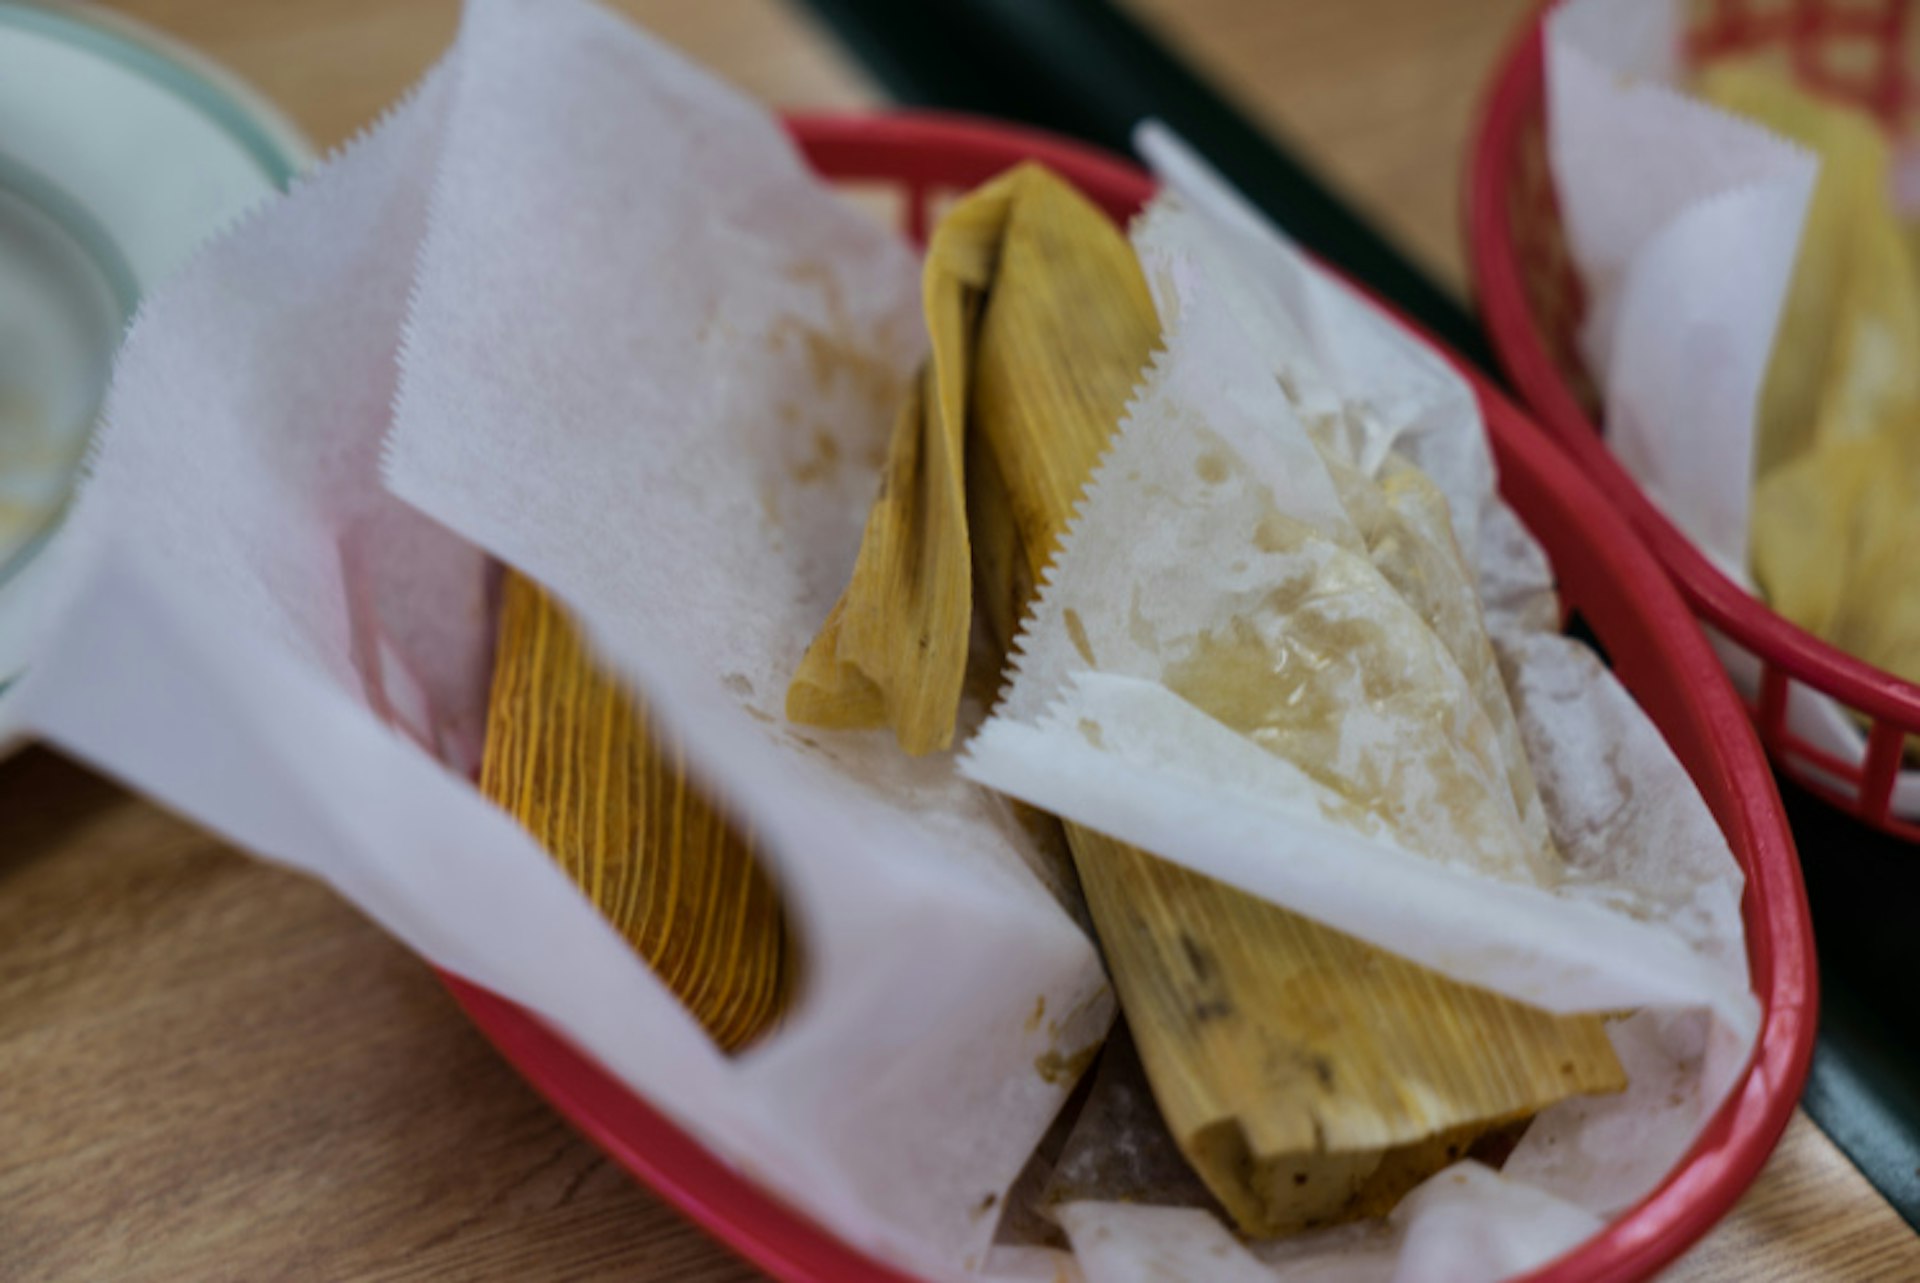 Chicago tamale. Image by Edsel Little / CC BY-SA 2.0